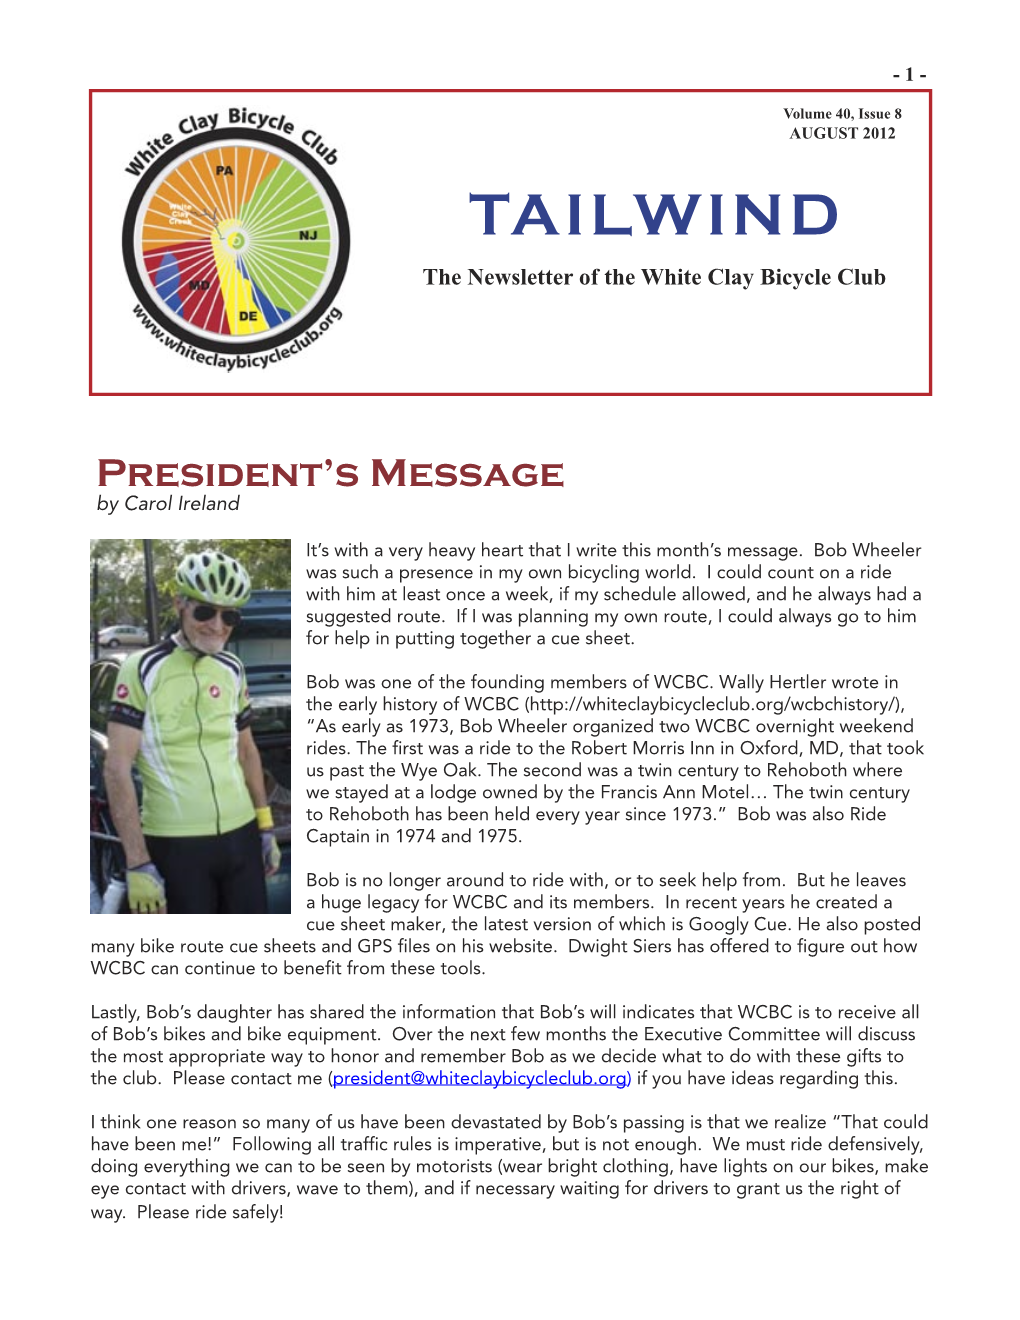 TAILWIND the Newsletter of the White Clay Bicycle Club